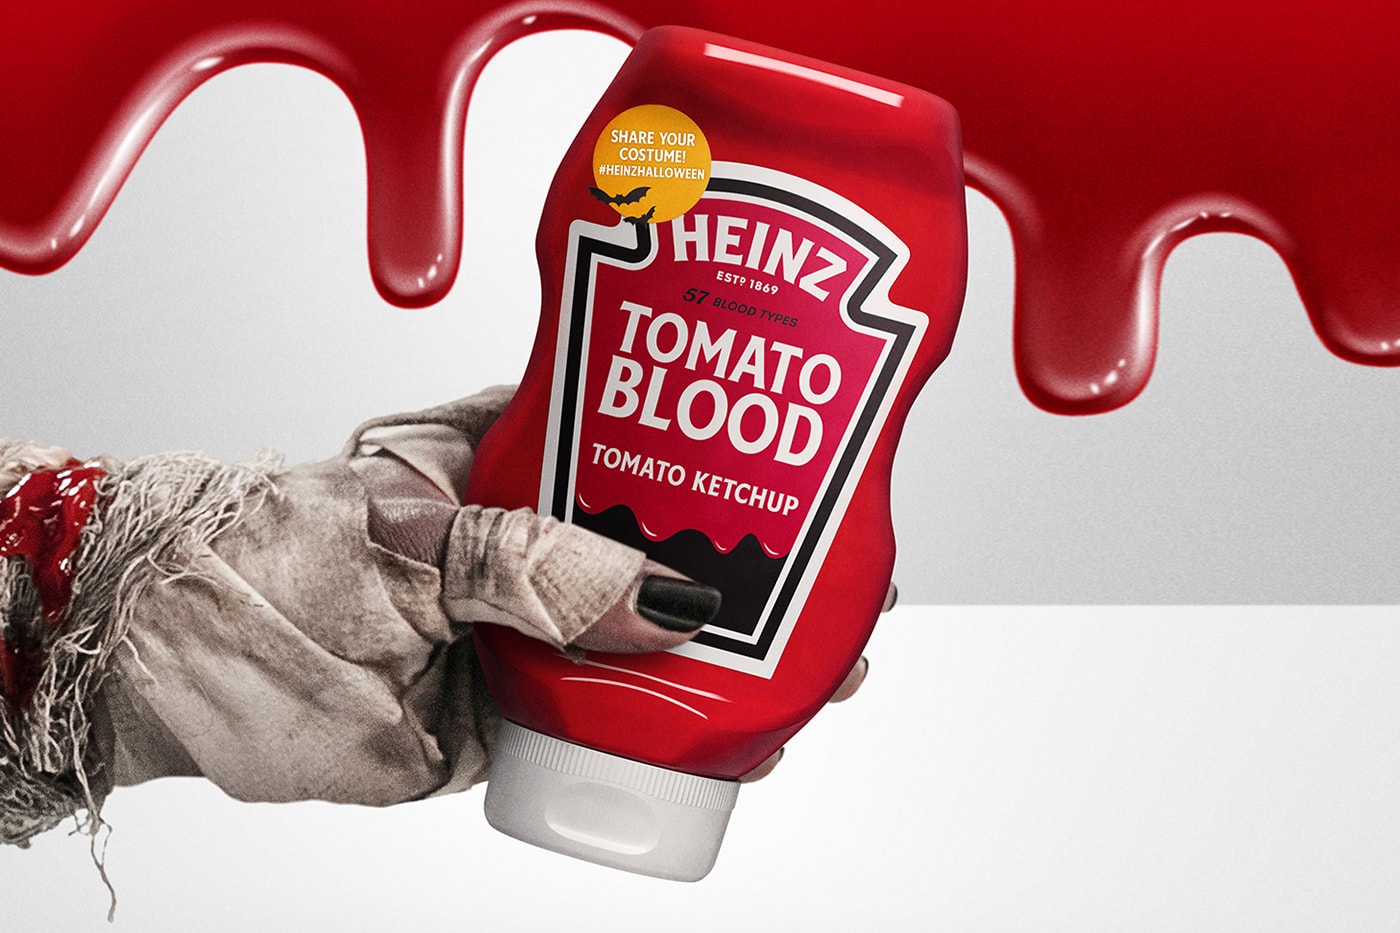 halloween heinz tomato blood costume kit tomato blood ketchup fangs face paint applicators tattoos spooky october 12 festive holiday release info 